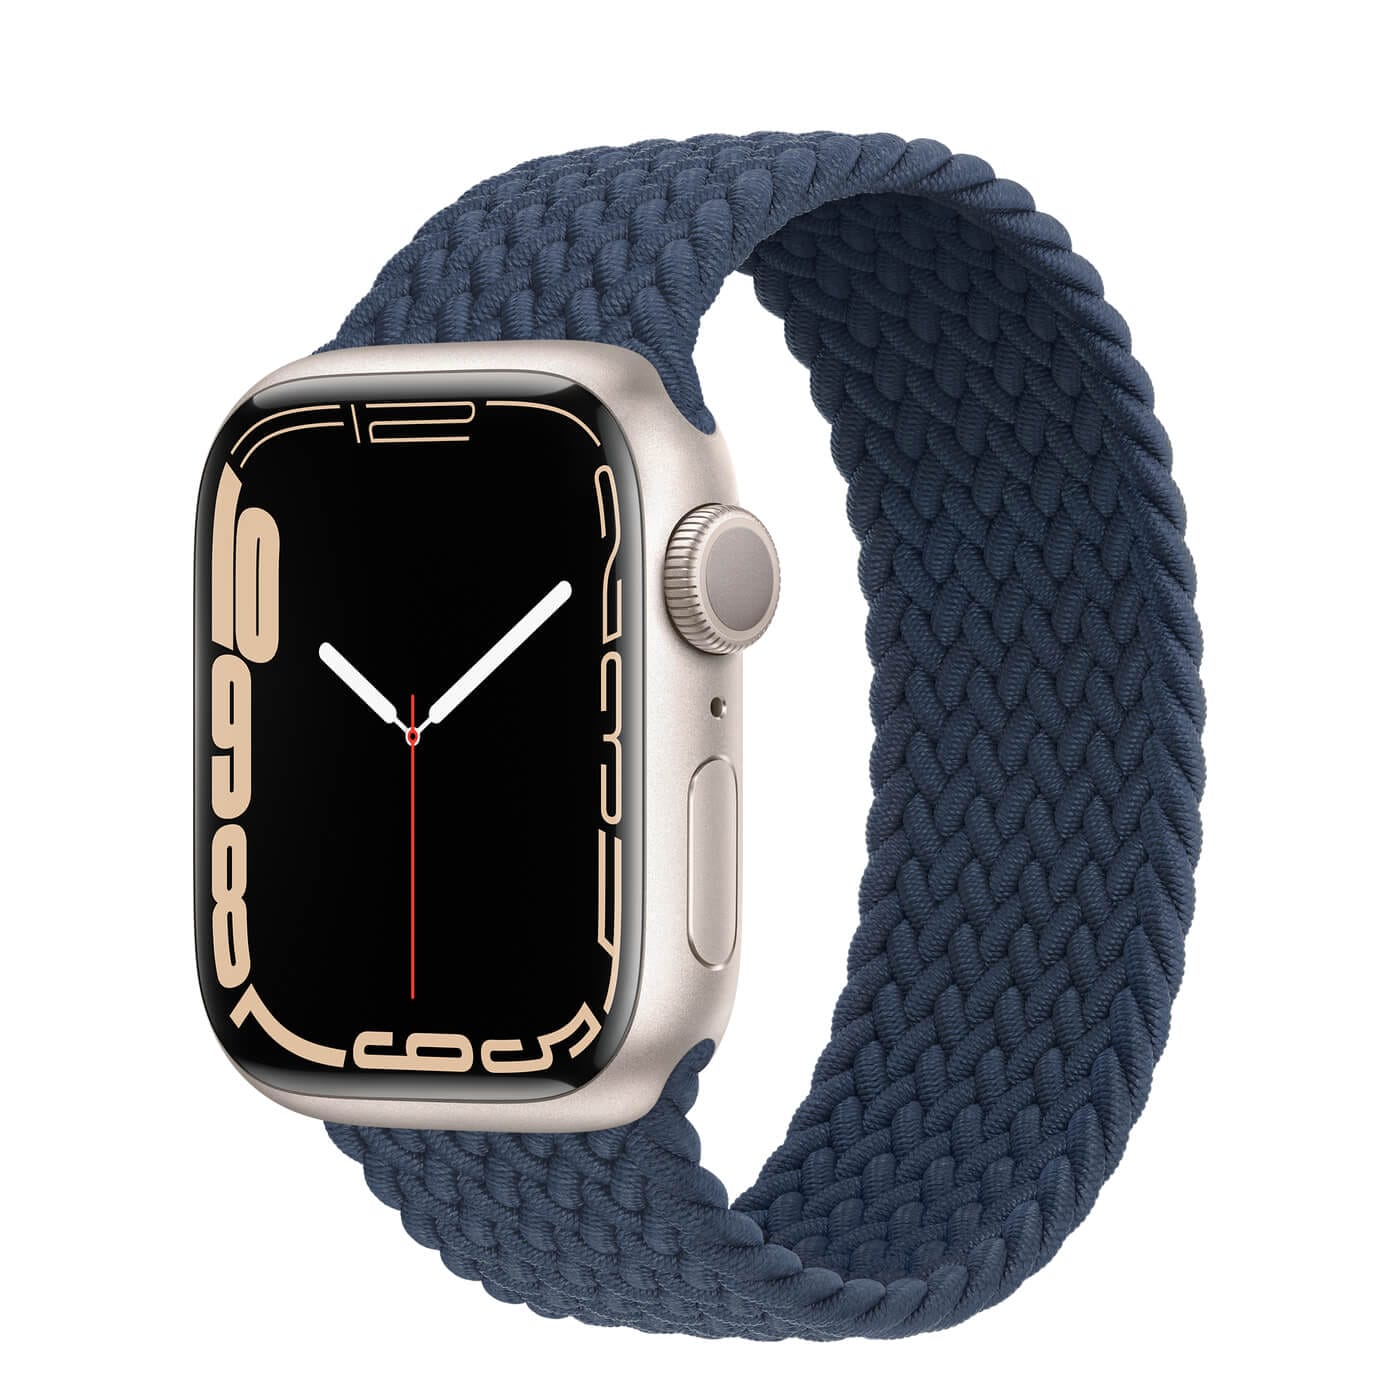 Apple Watch Series 7 with Braided Solo Loop Strap